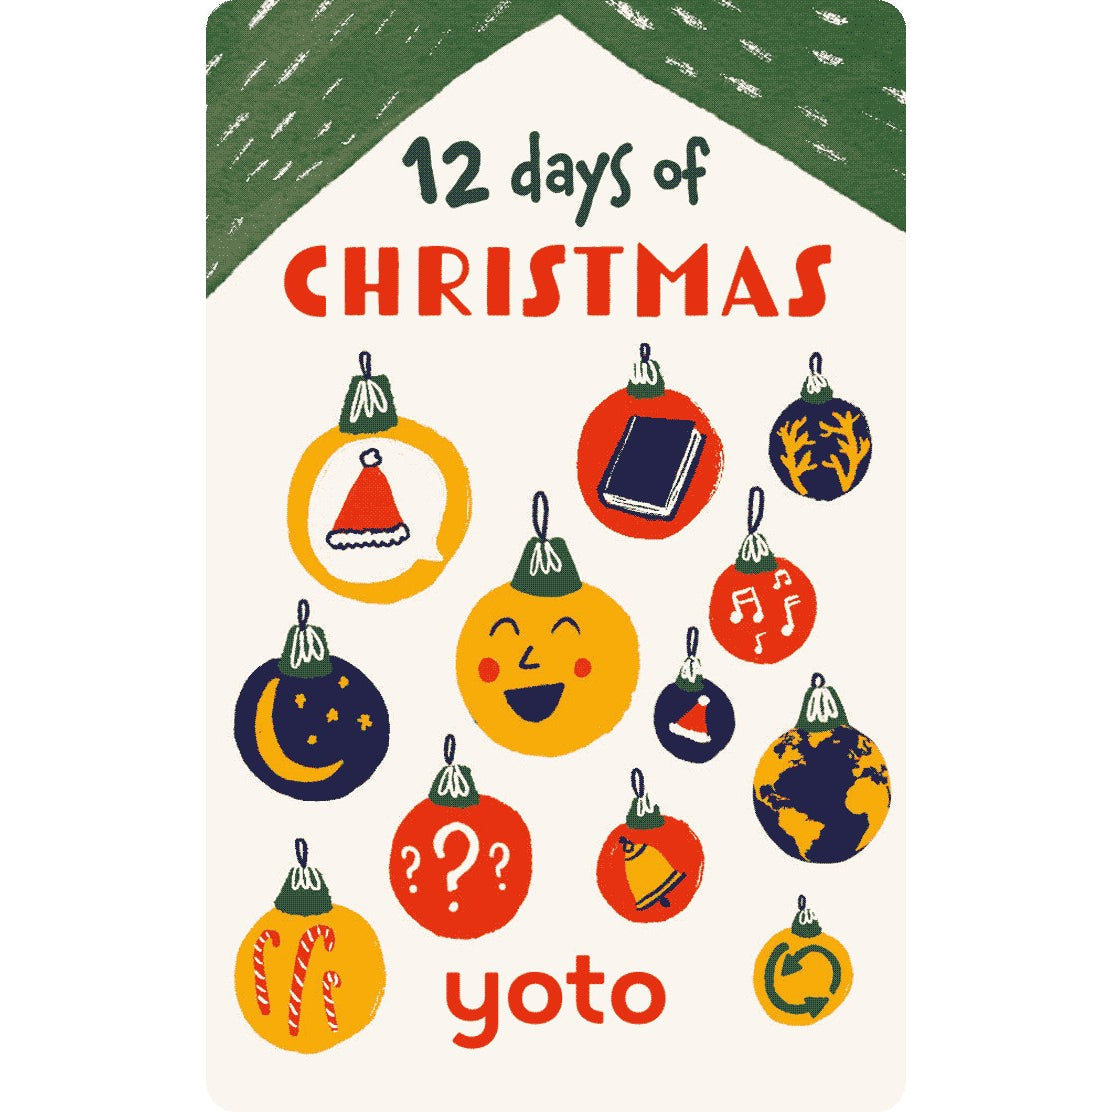 Yoto Card - 12 Days of Christmas - Child Friendly Audio Story Card